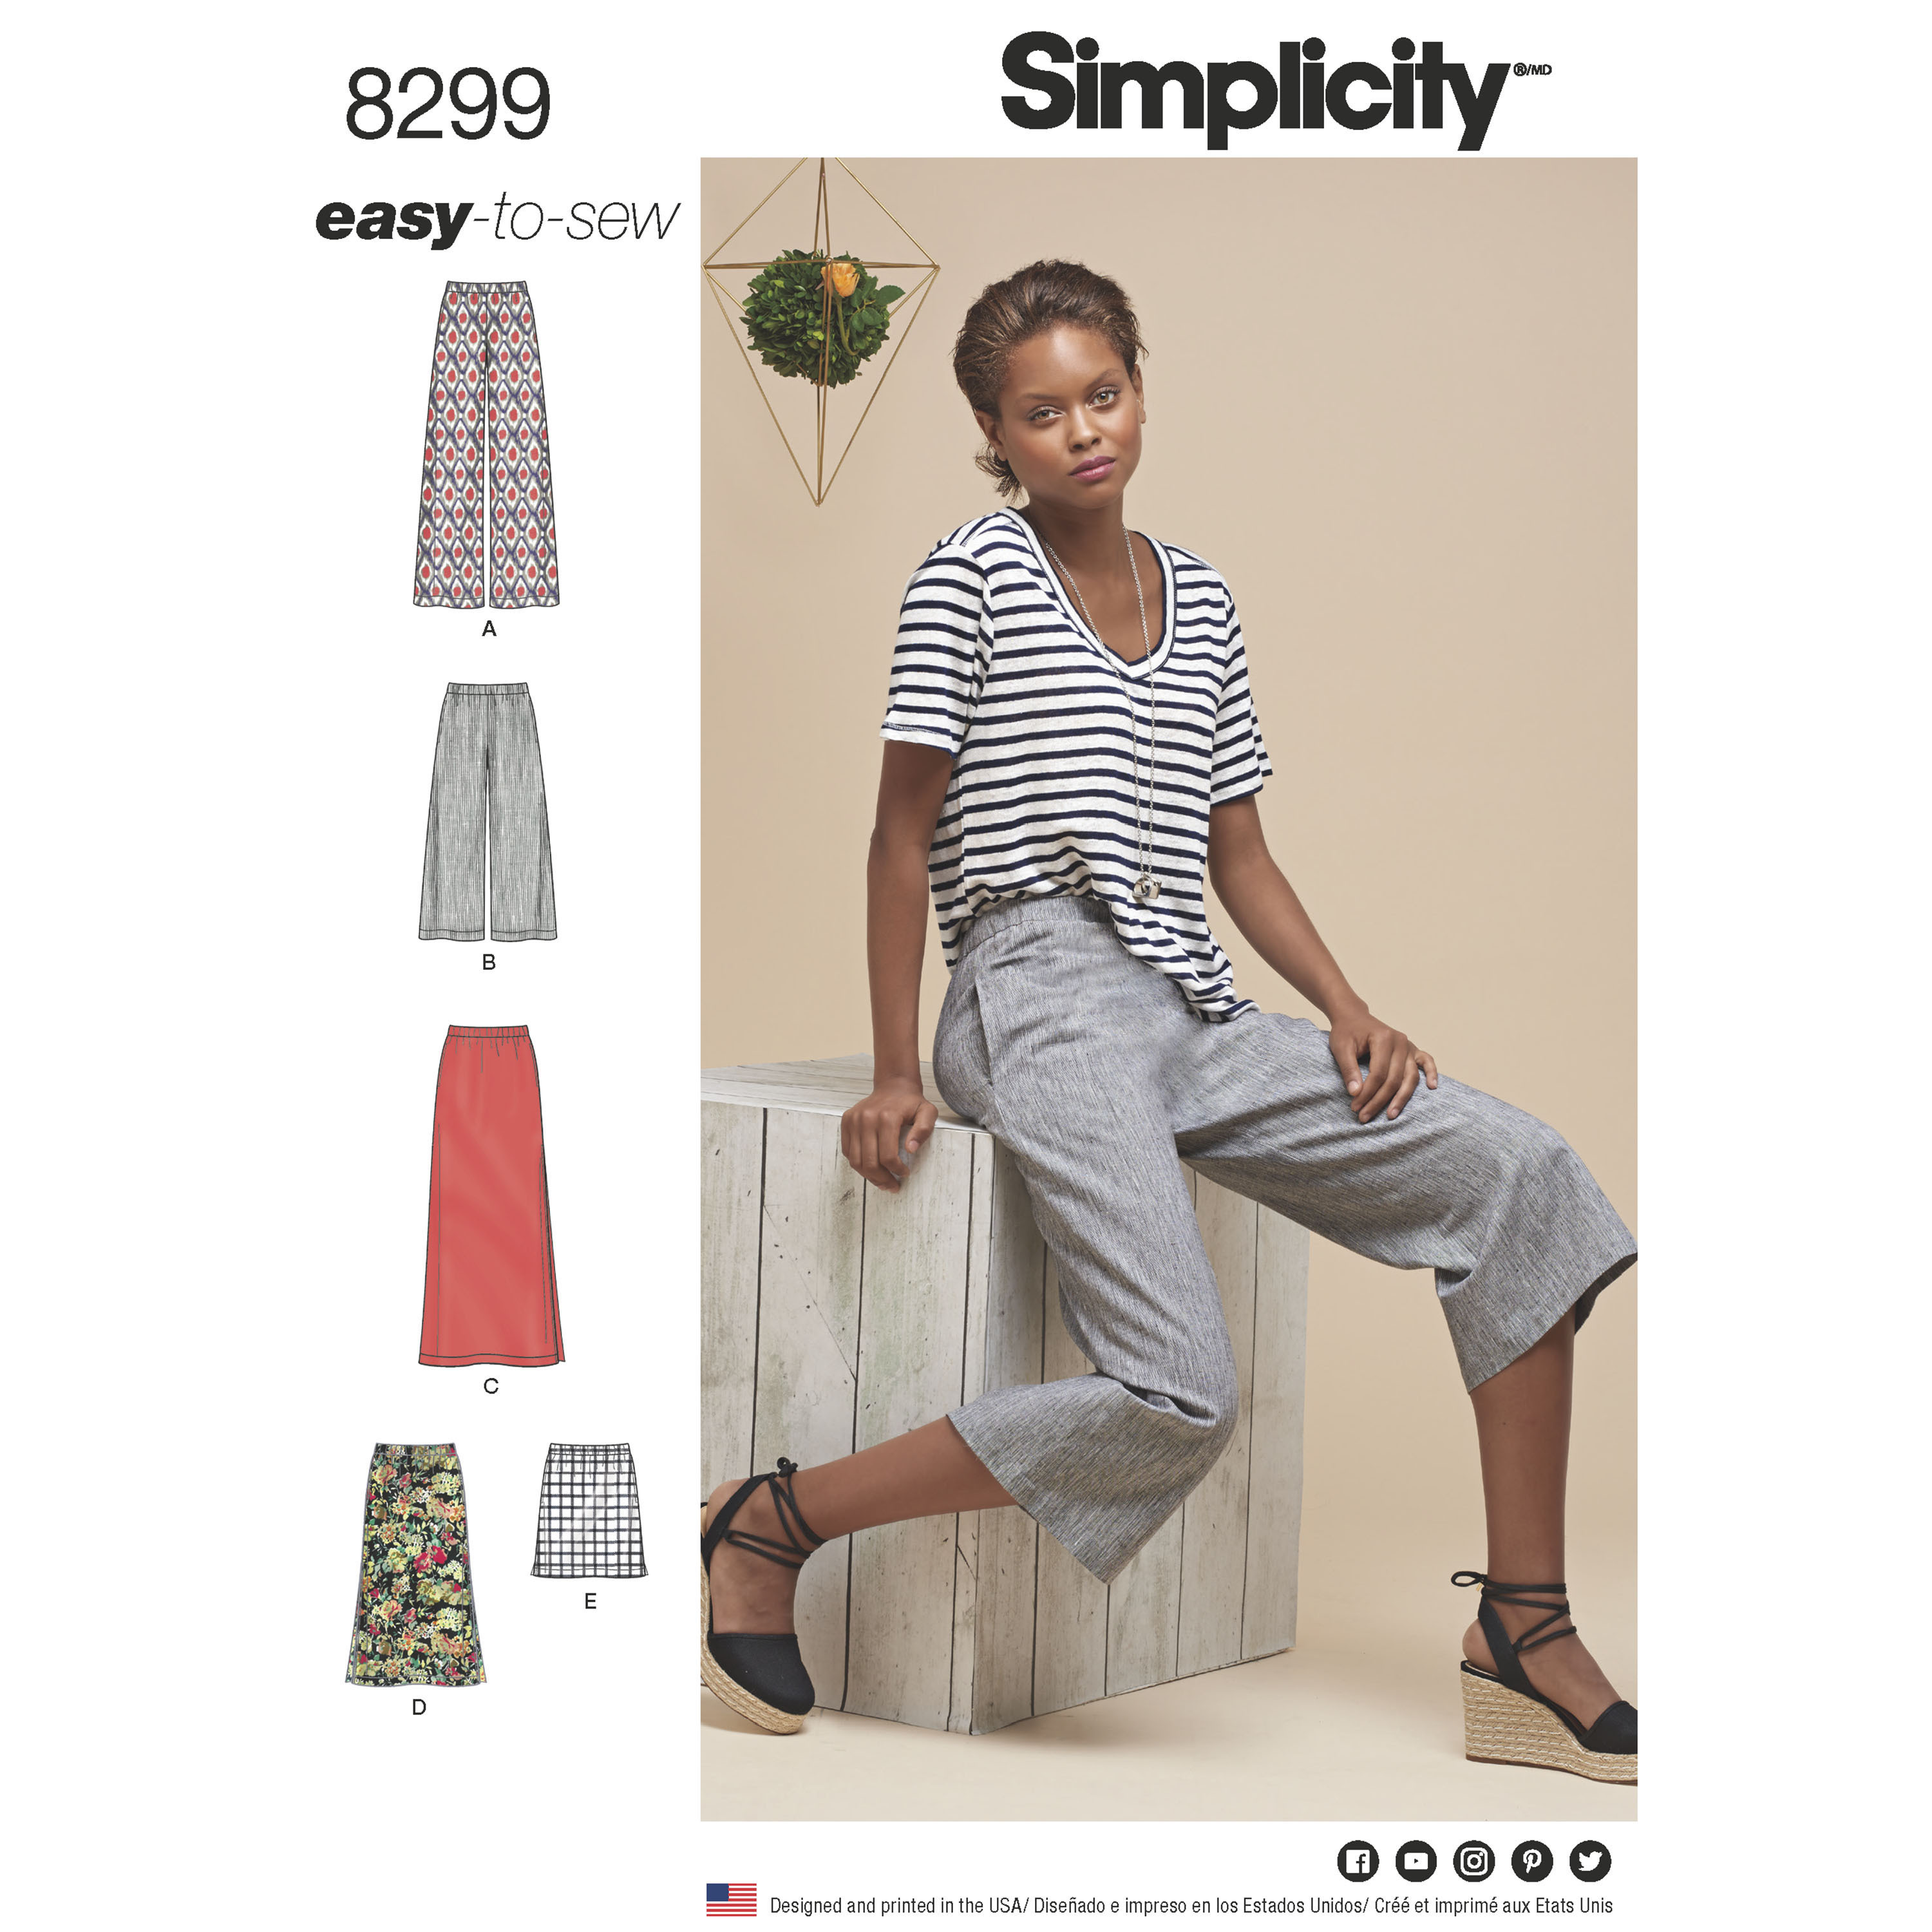 Simplicity SEWING PATTERN S9715 Misses' Shirt, Trousers & Shorts 8-16 Or 18  | eBay